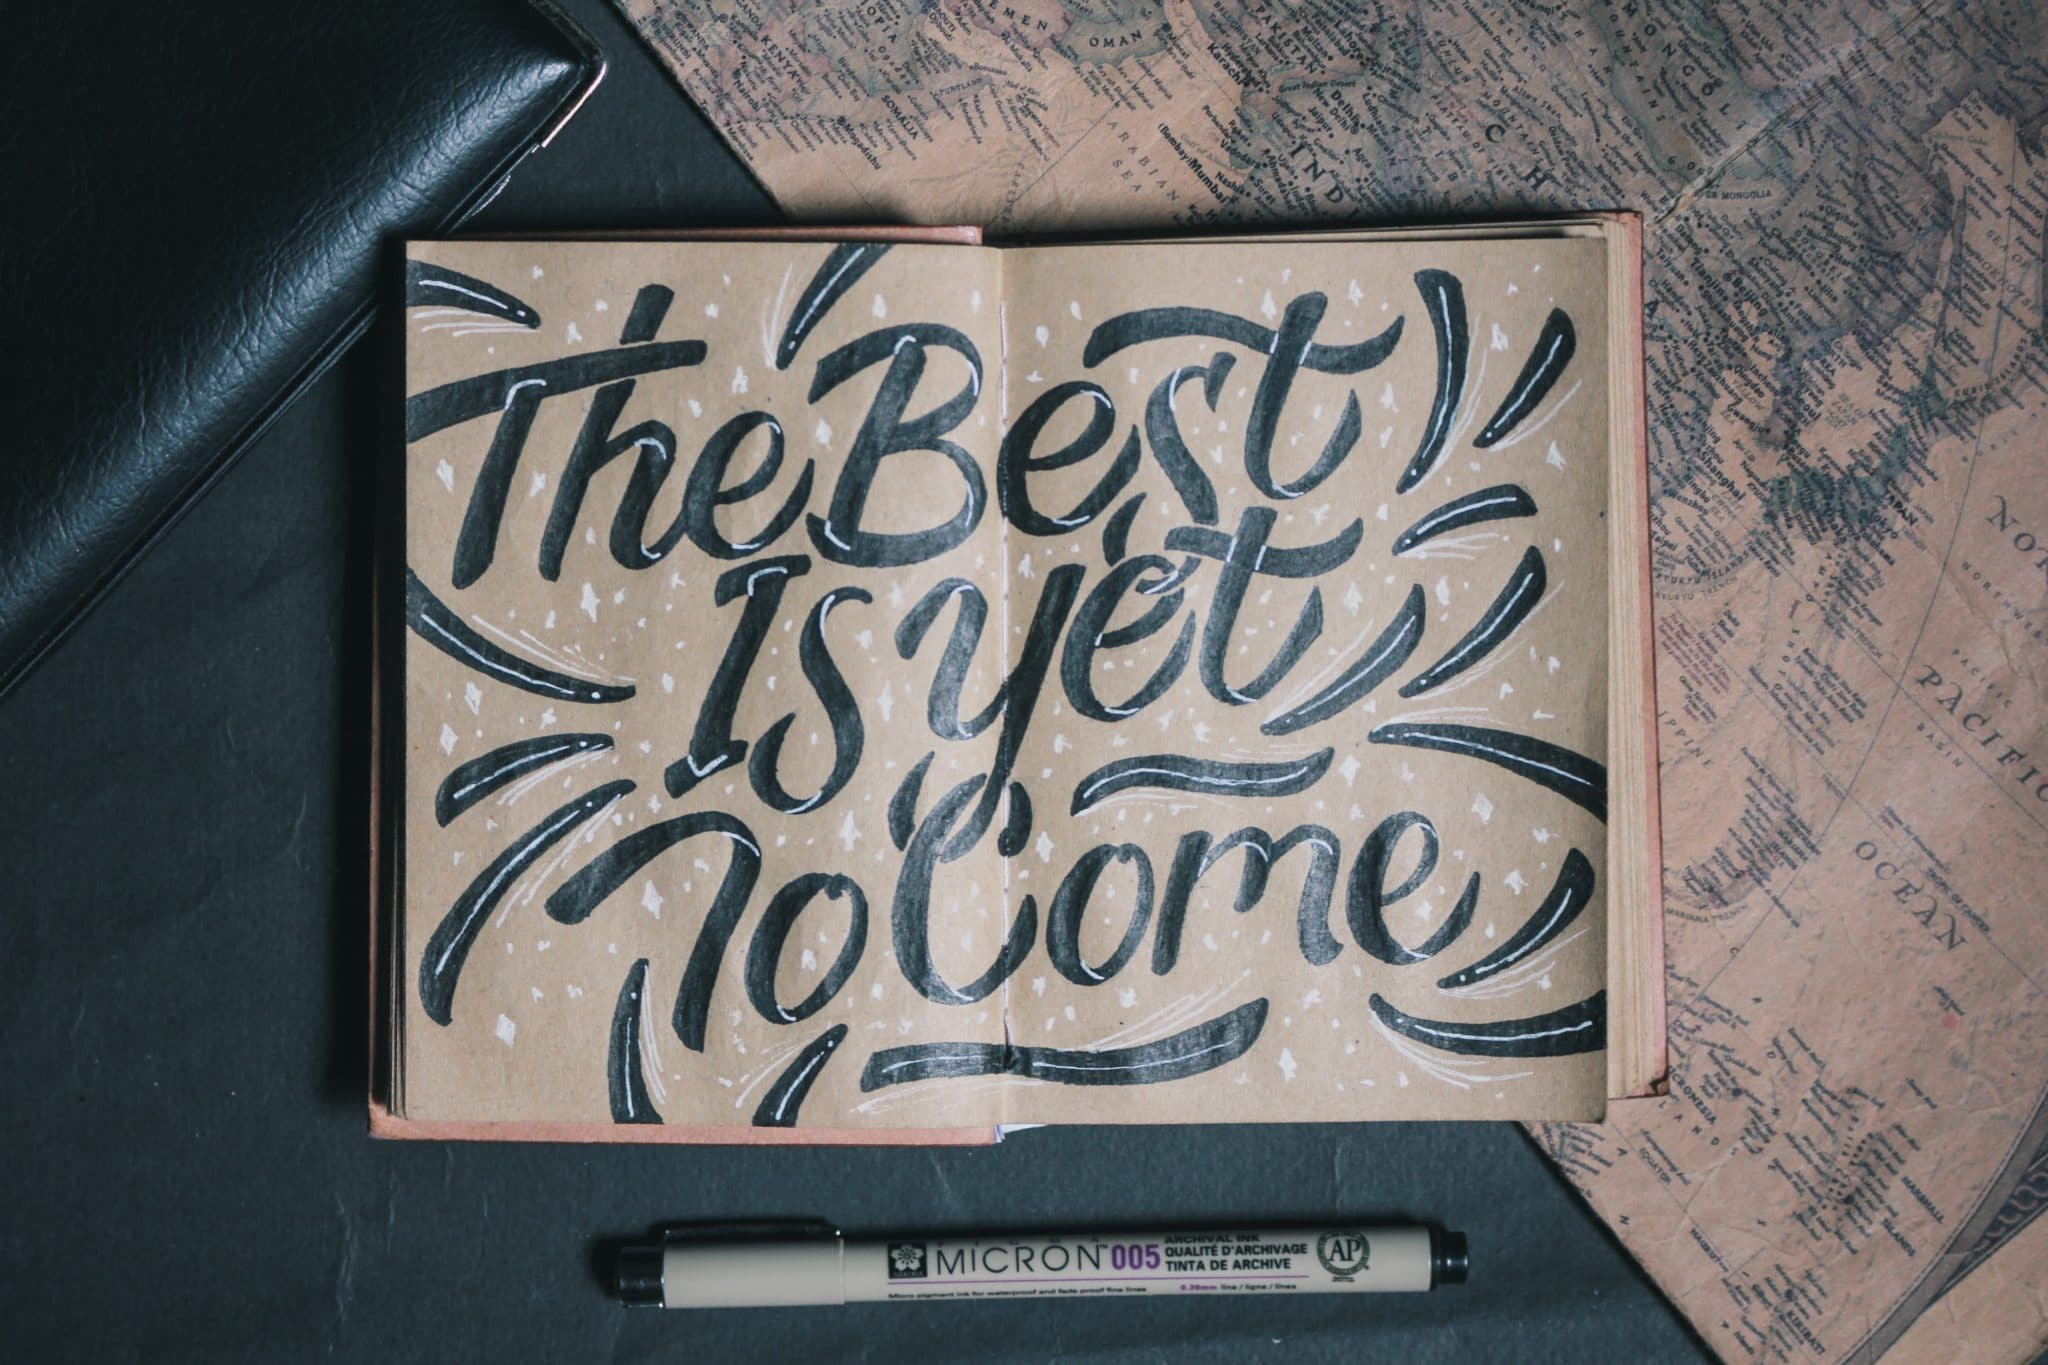 "The Best is Yet to Come" written in a book for inspiration